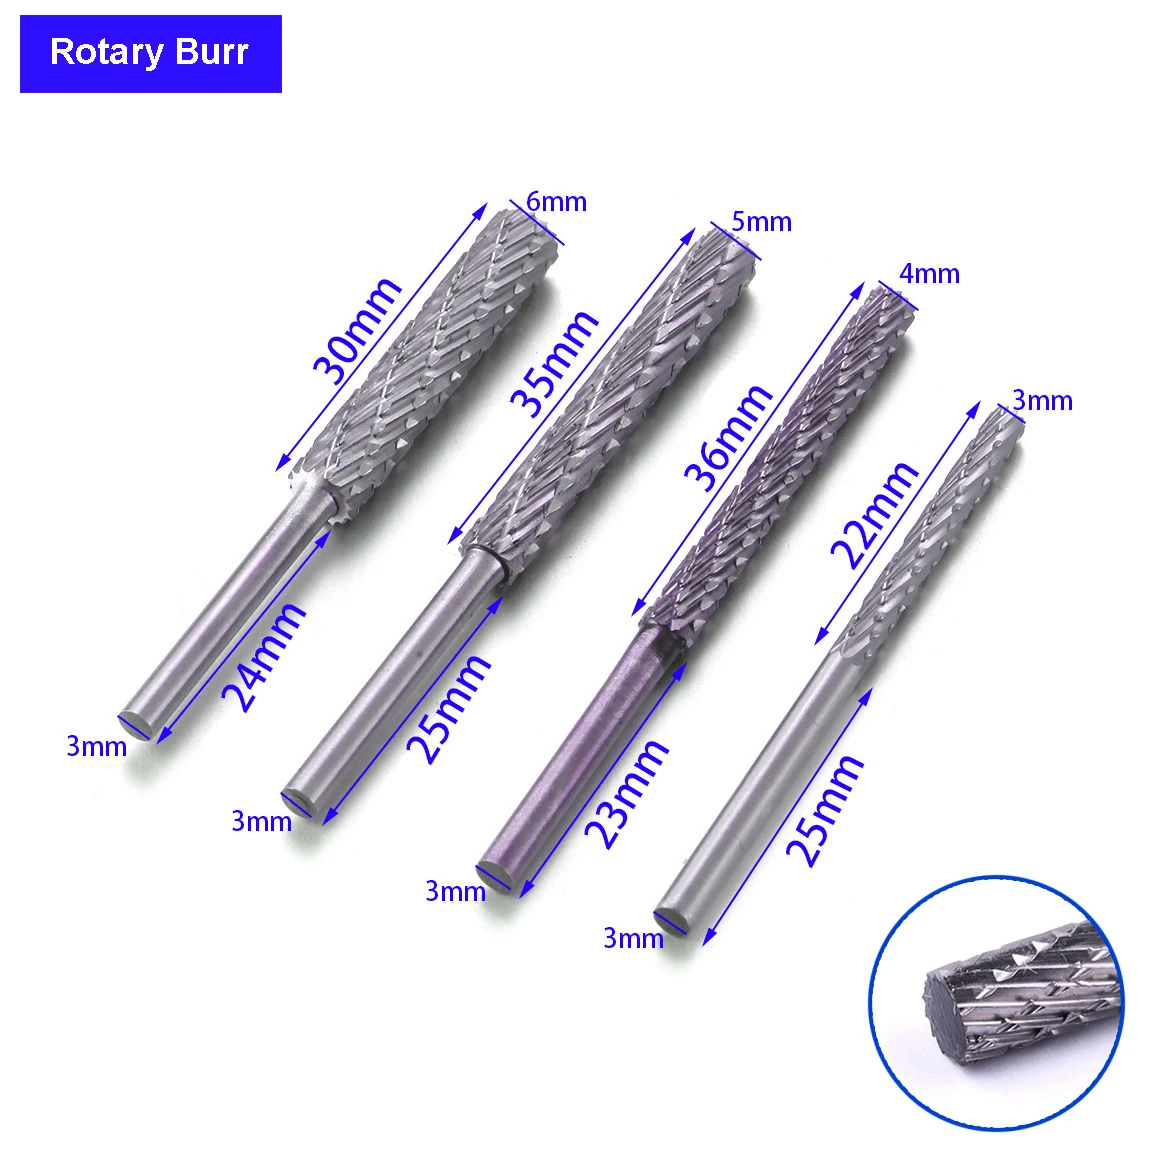 1PC Rotary Burr Cutter High Speed Steel Rotary File 3x3/4/5/6mm for Dremel Accessories Milling Cutter Drill Bit Engraving Bits